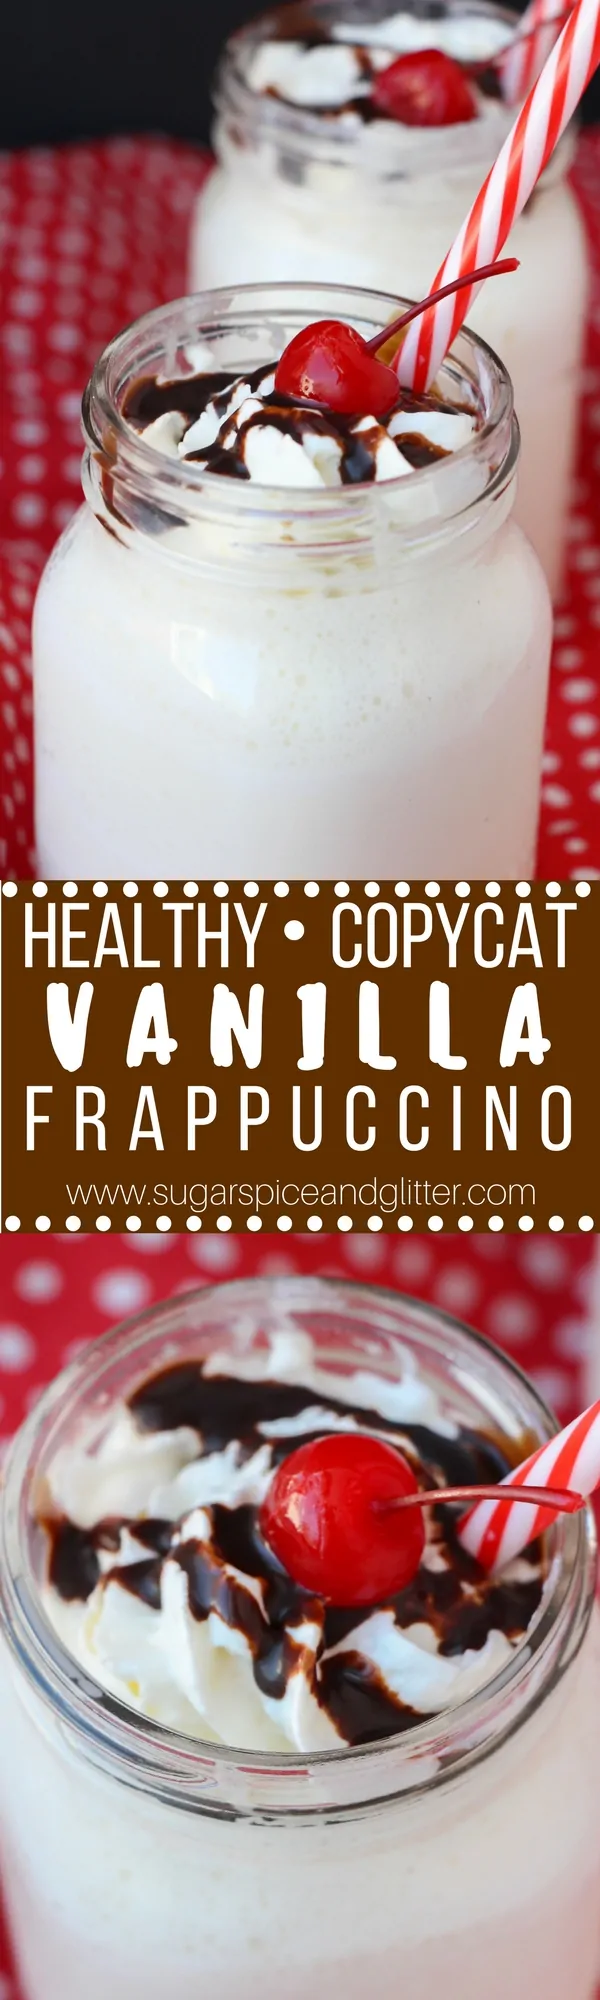 A healthy Starbucks copycat frappuccino - sugarfree with no artificial sweeteners, so you can indulge without guilt